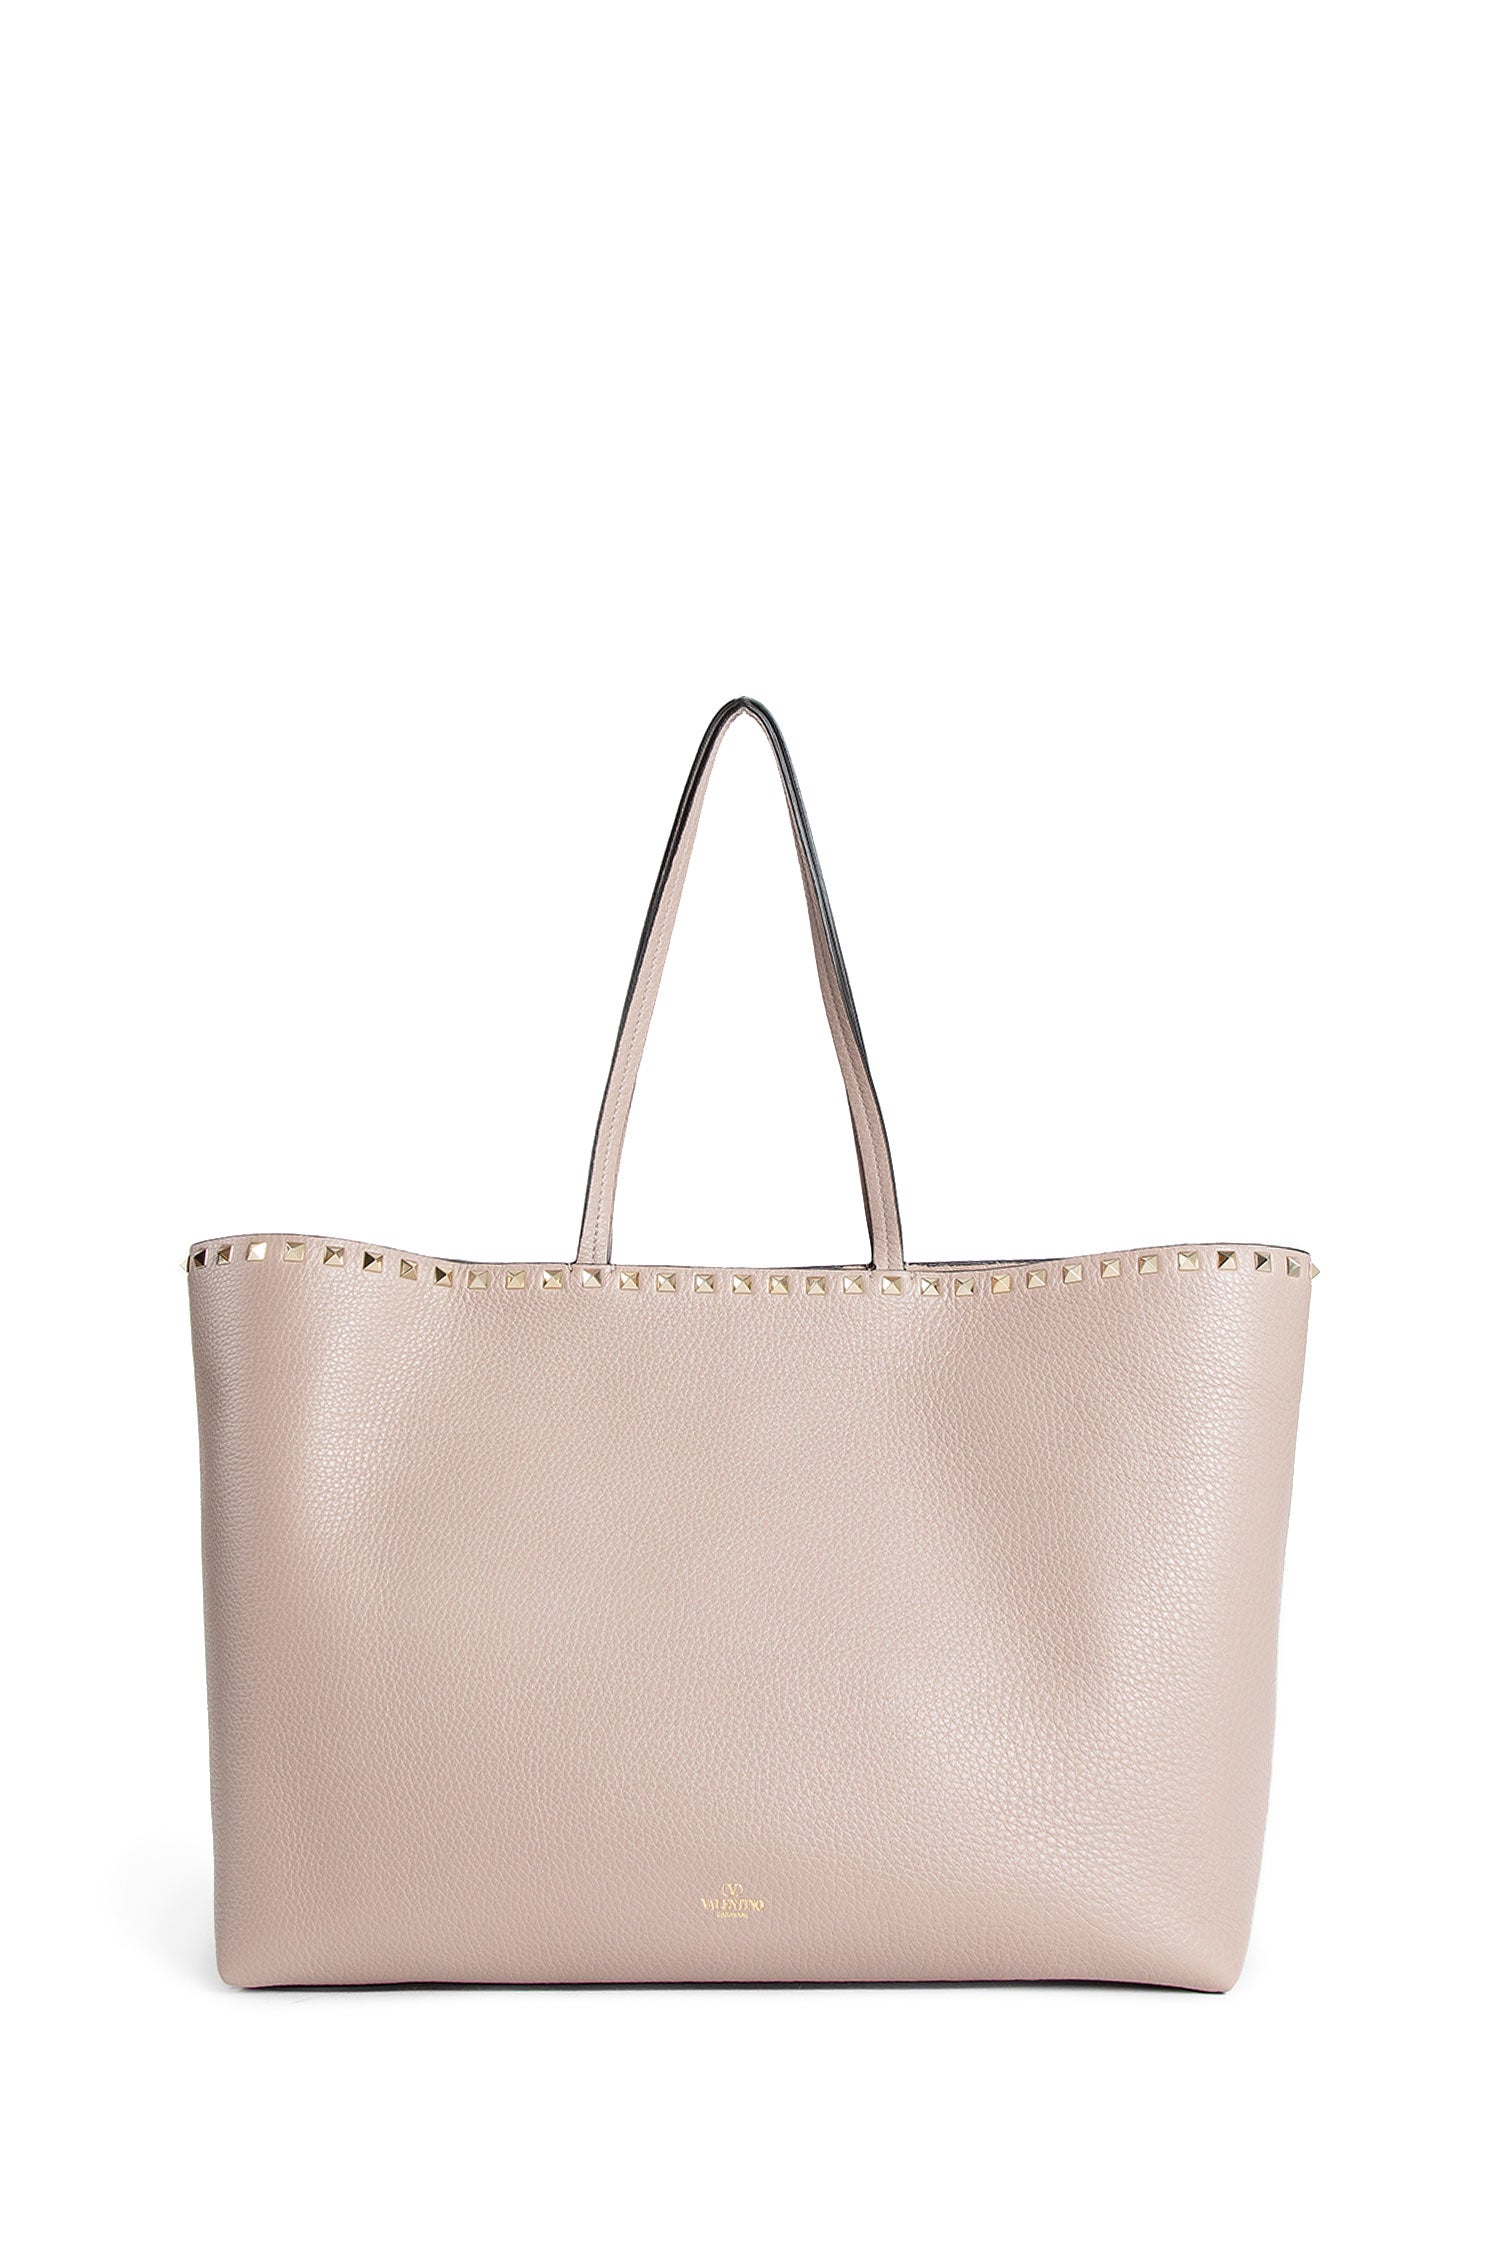 VALENTINO WOMAN PINK TOTE BAGS